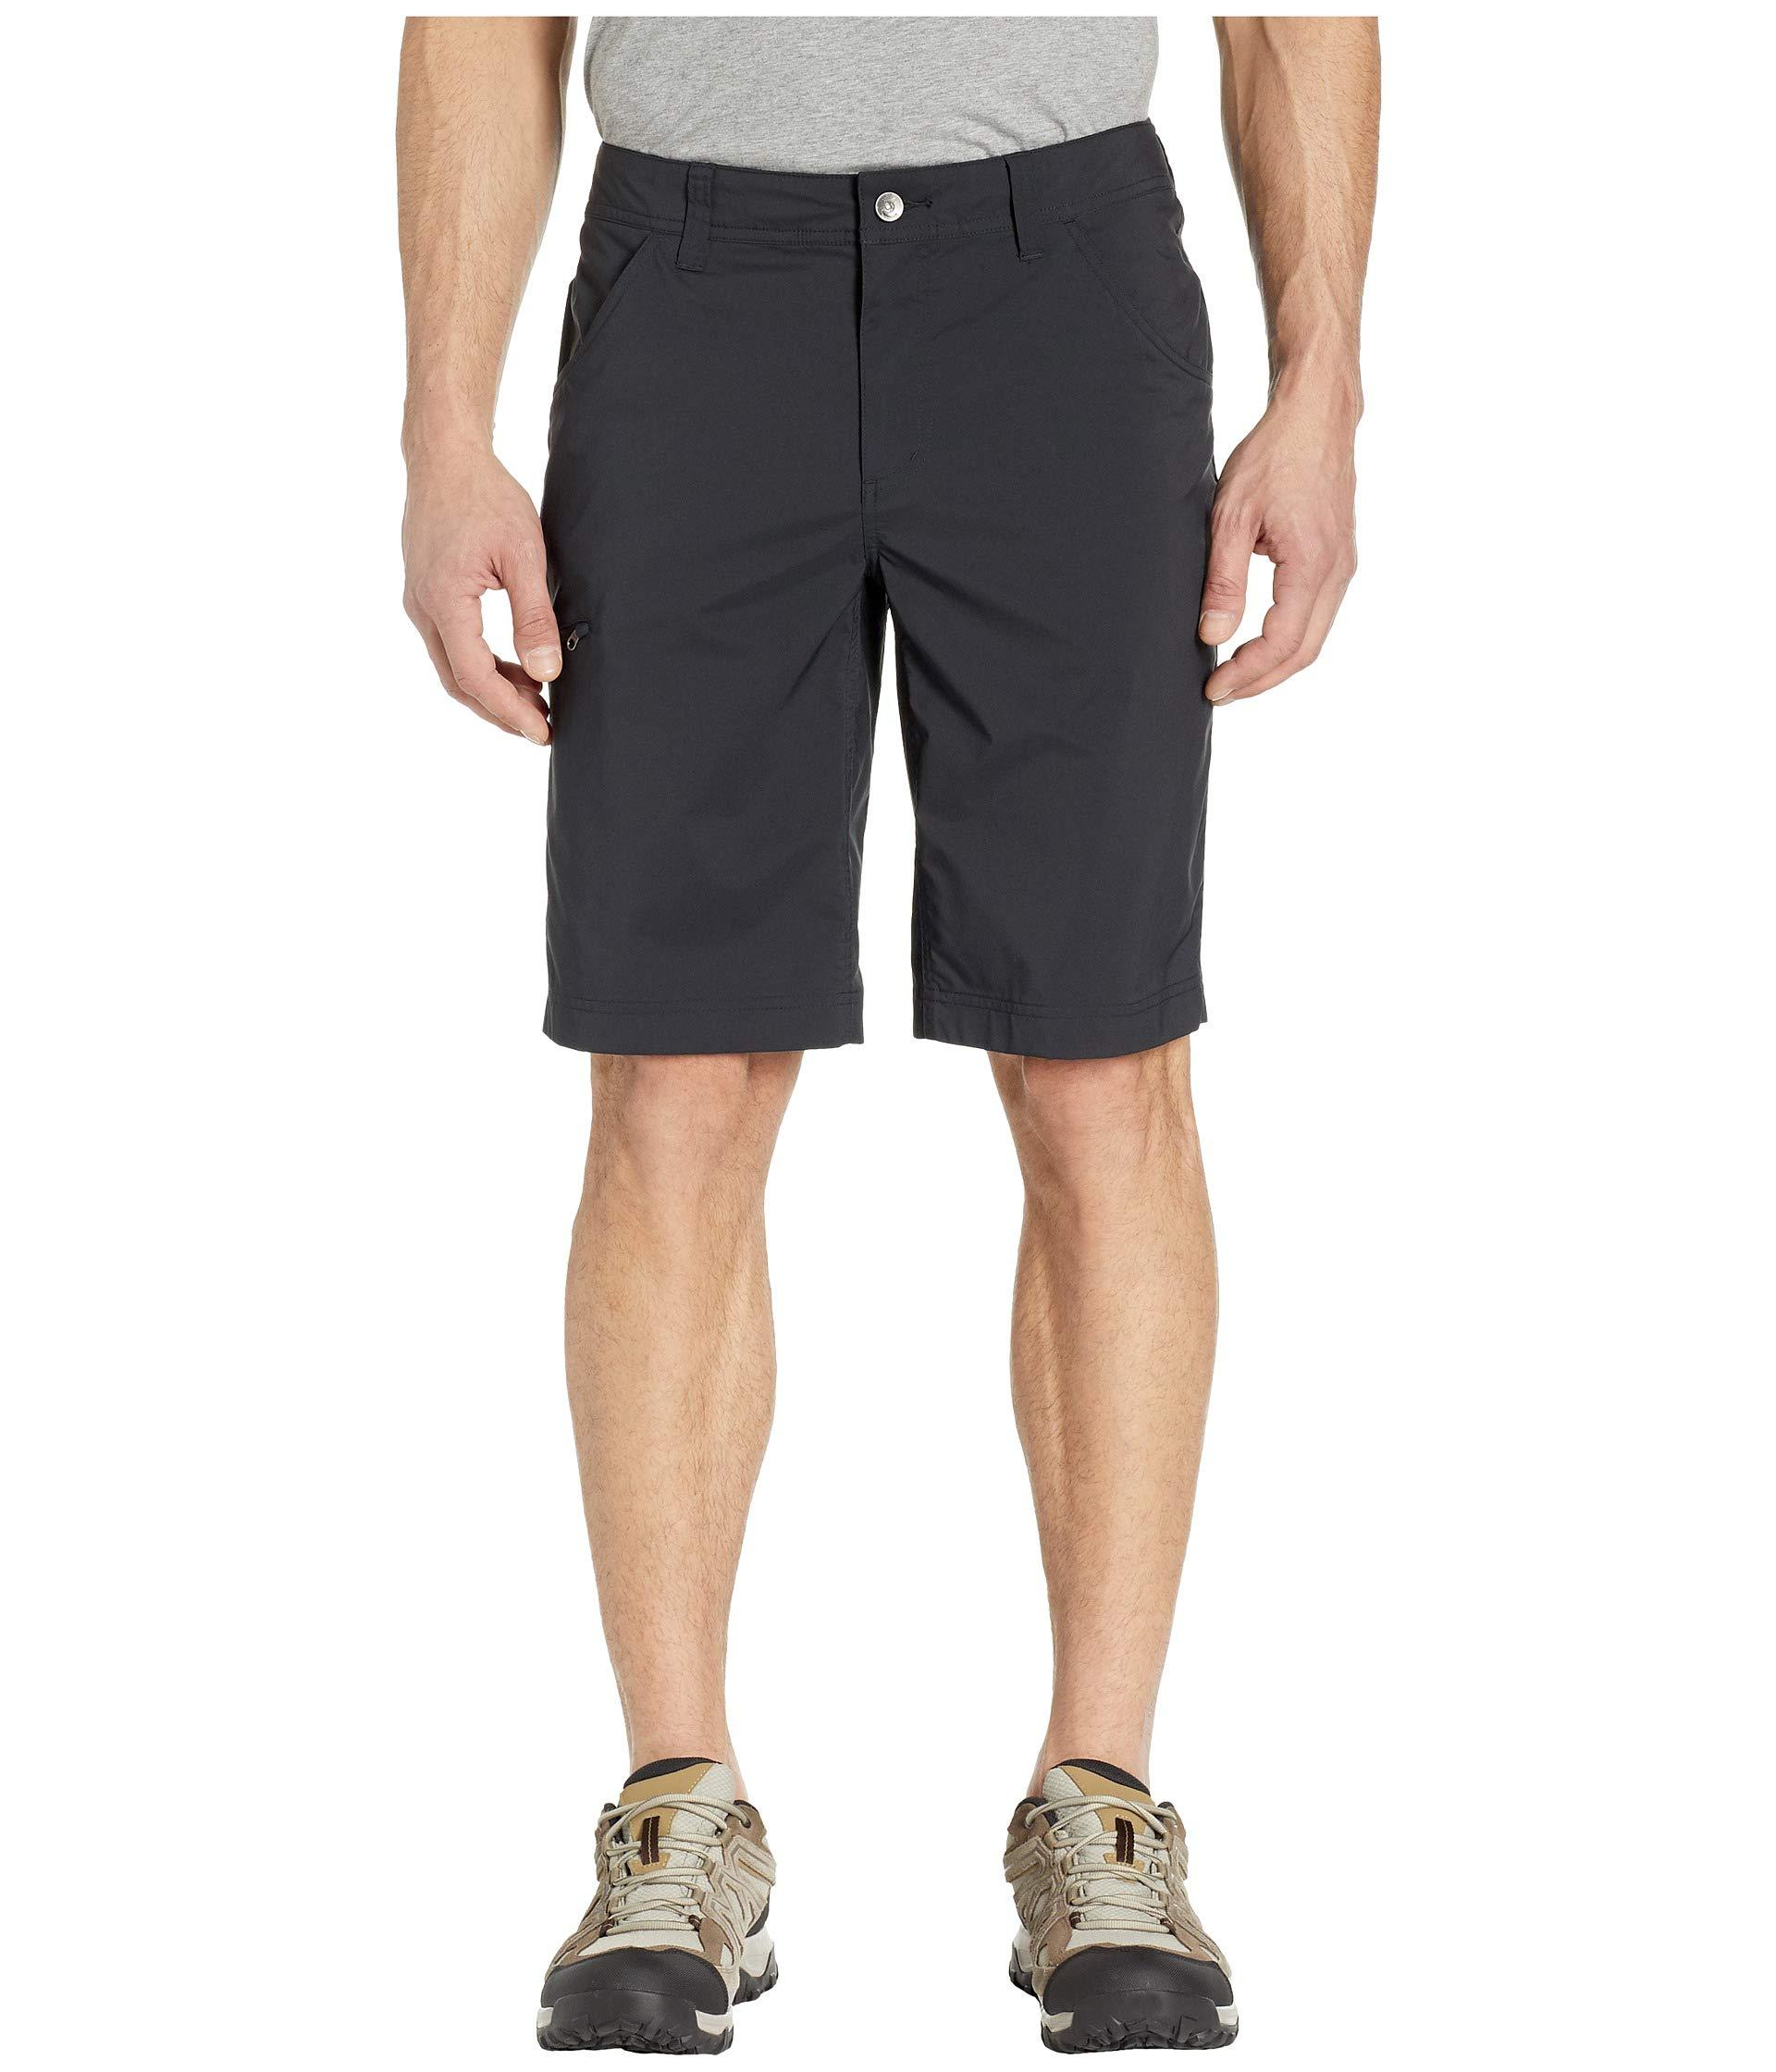 Marmot Synthetic Arch Rock Shorts in Black for Men - Lyst